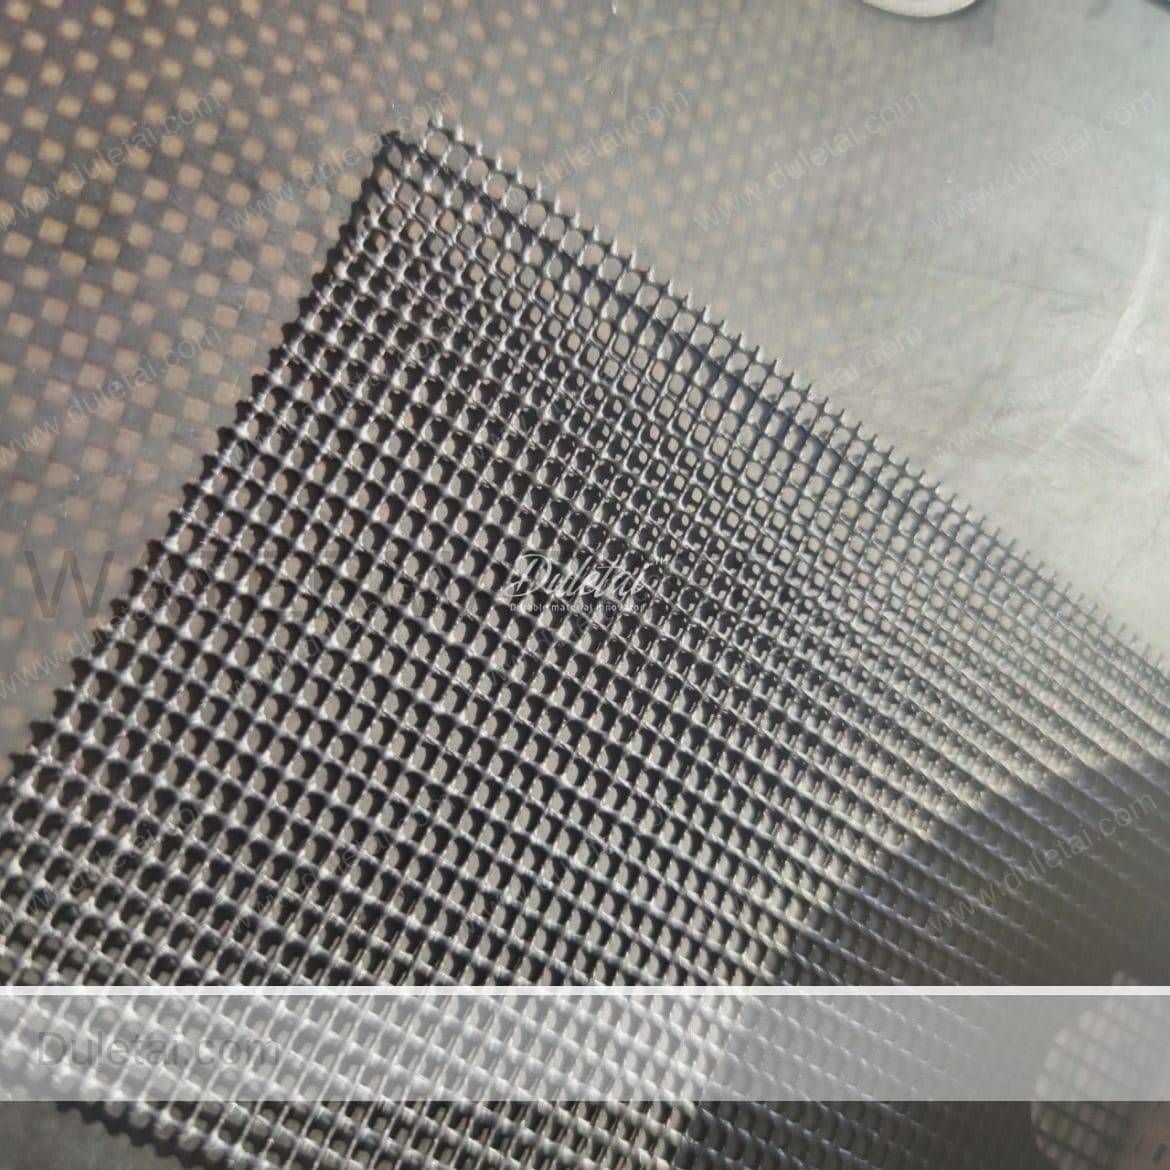 PVC coated polyester mesh fabric, pet screen, fence screen material